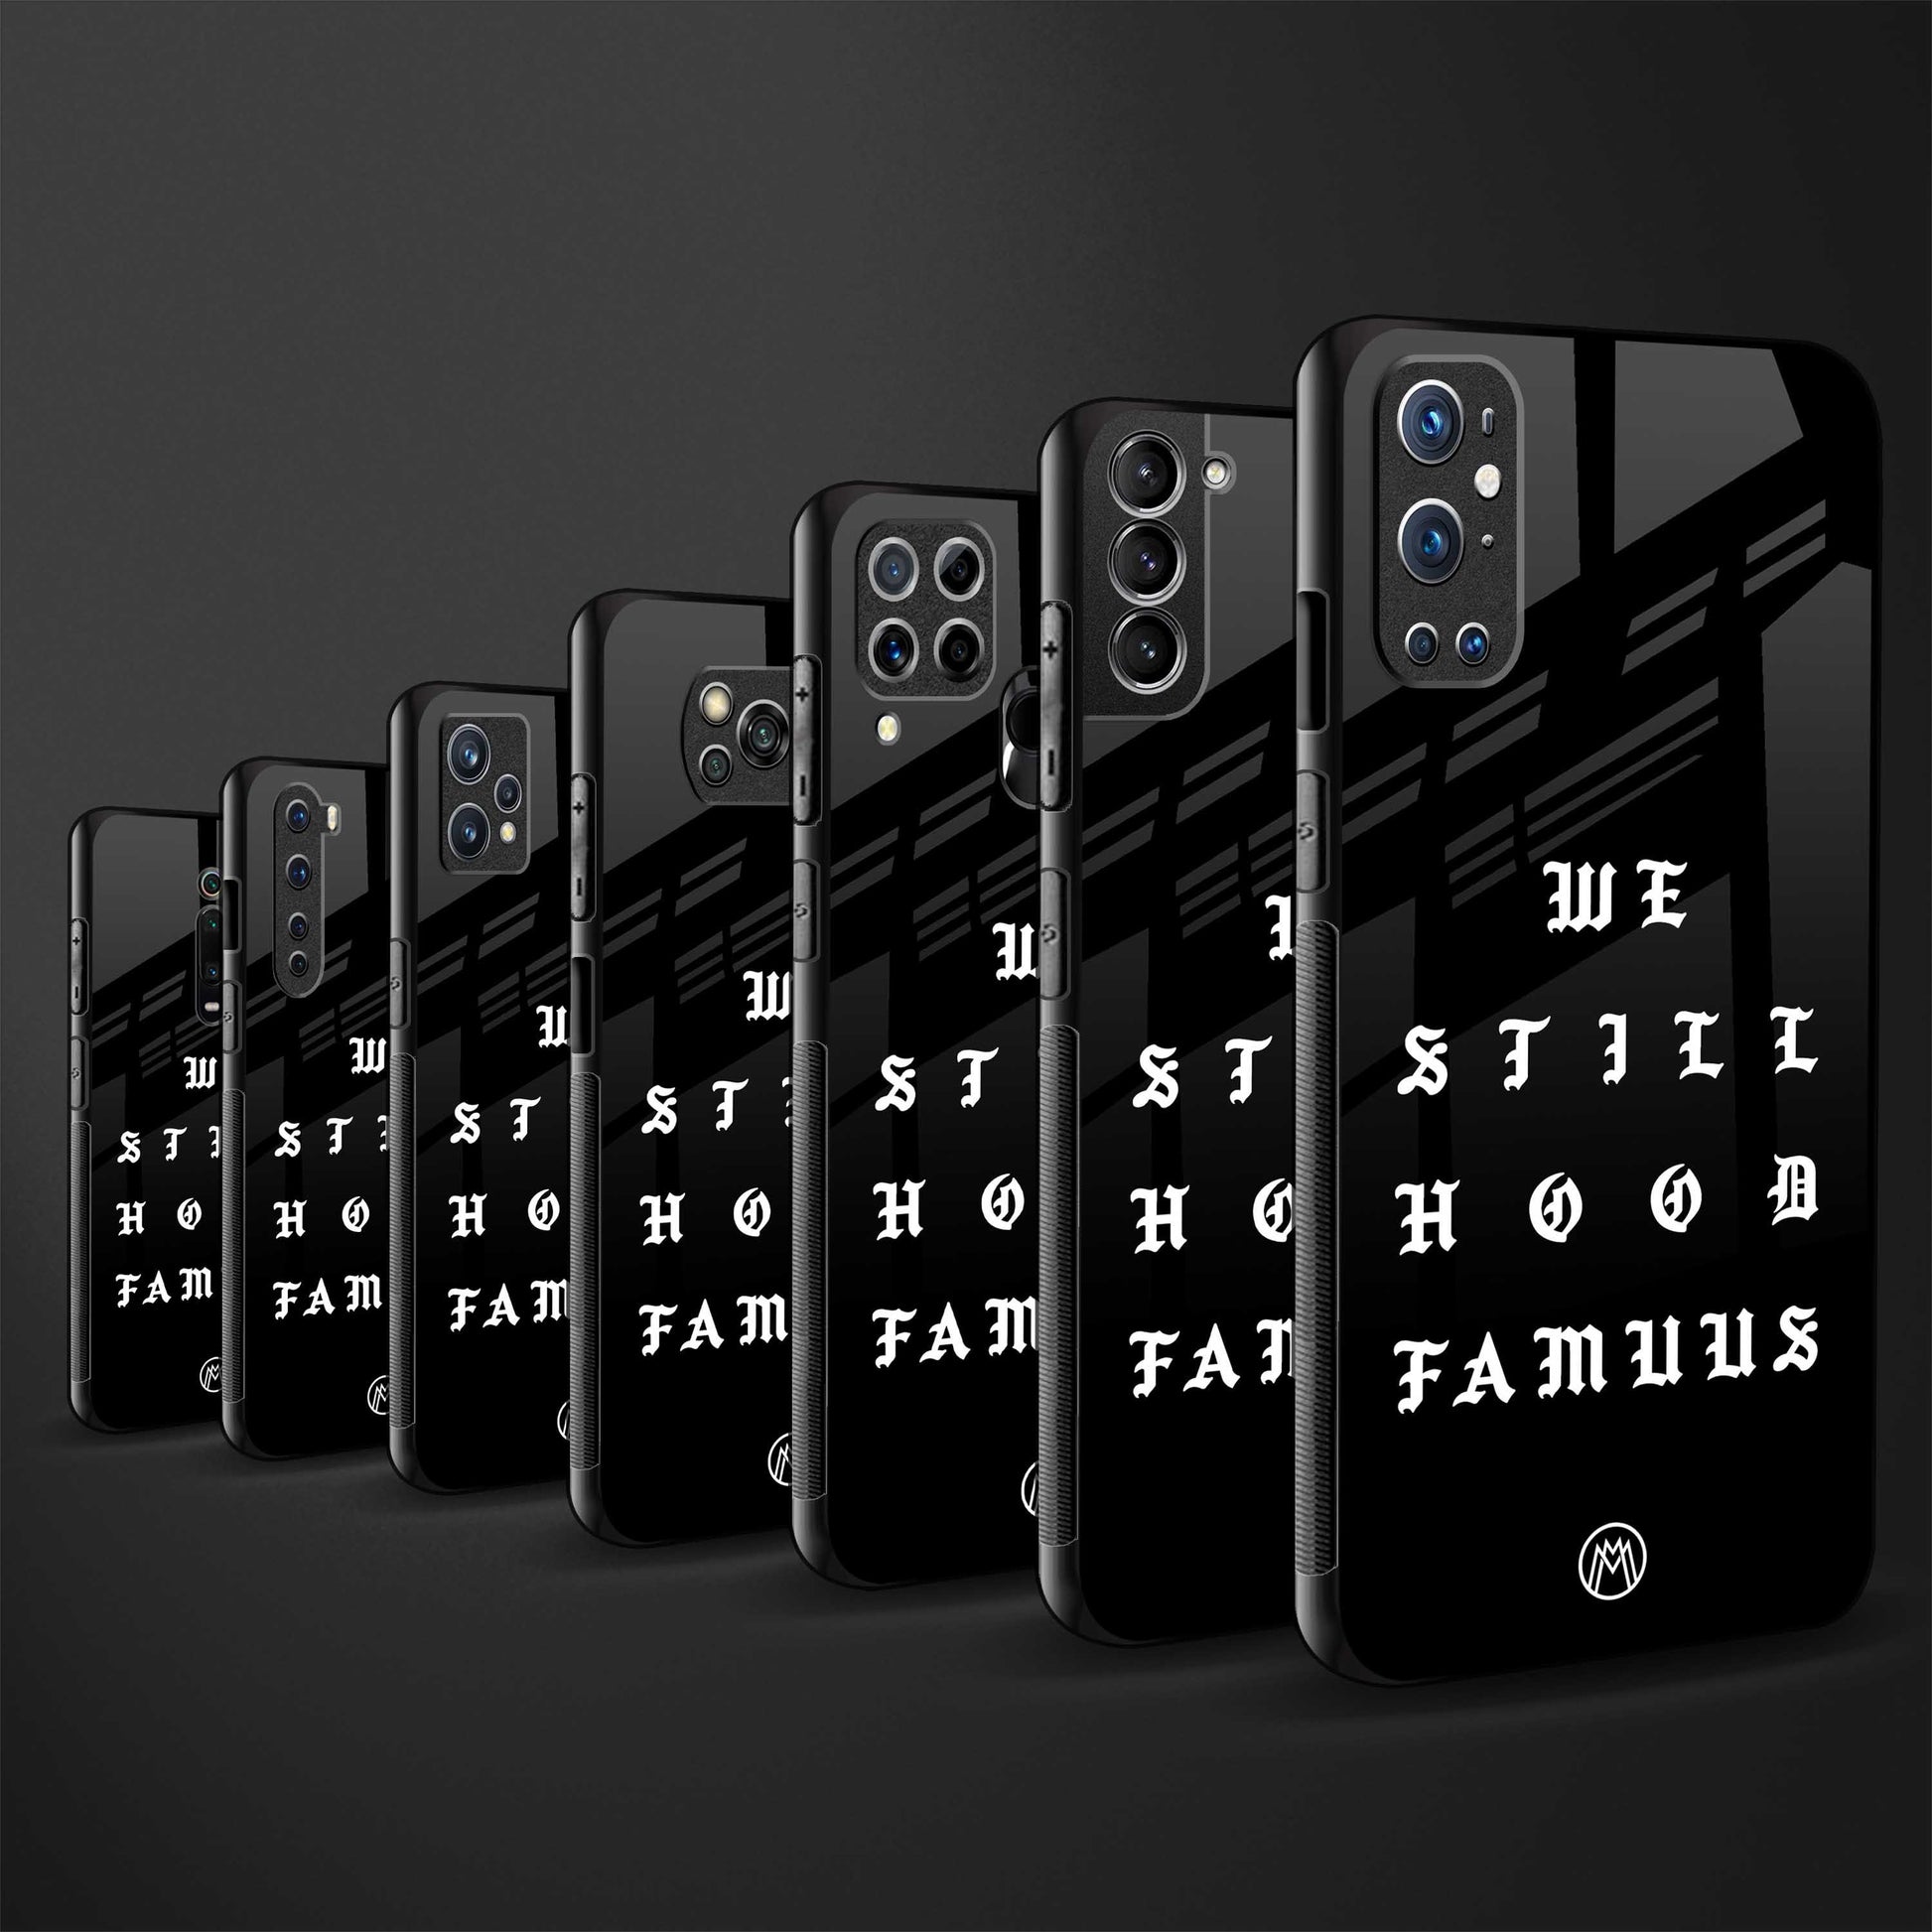 hood famous phone cover for samsung galaxy s20 ultra